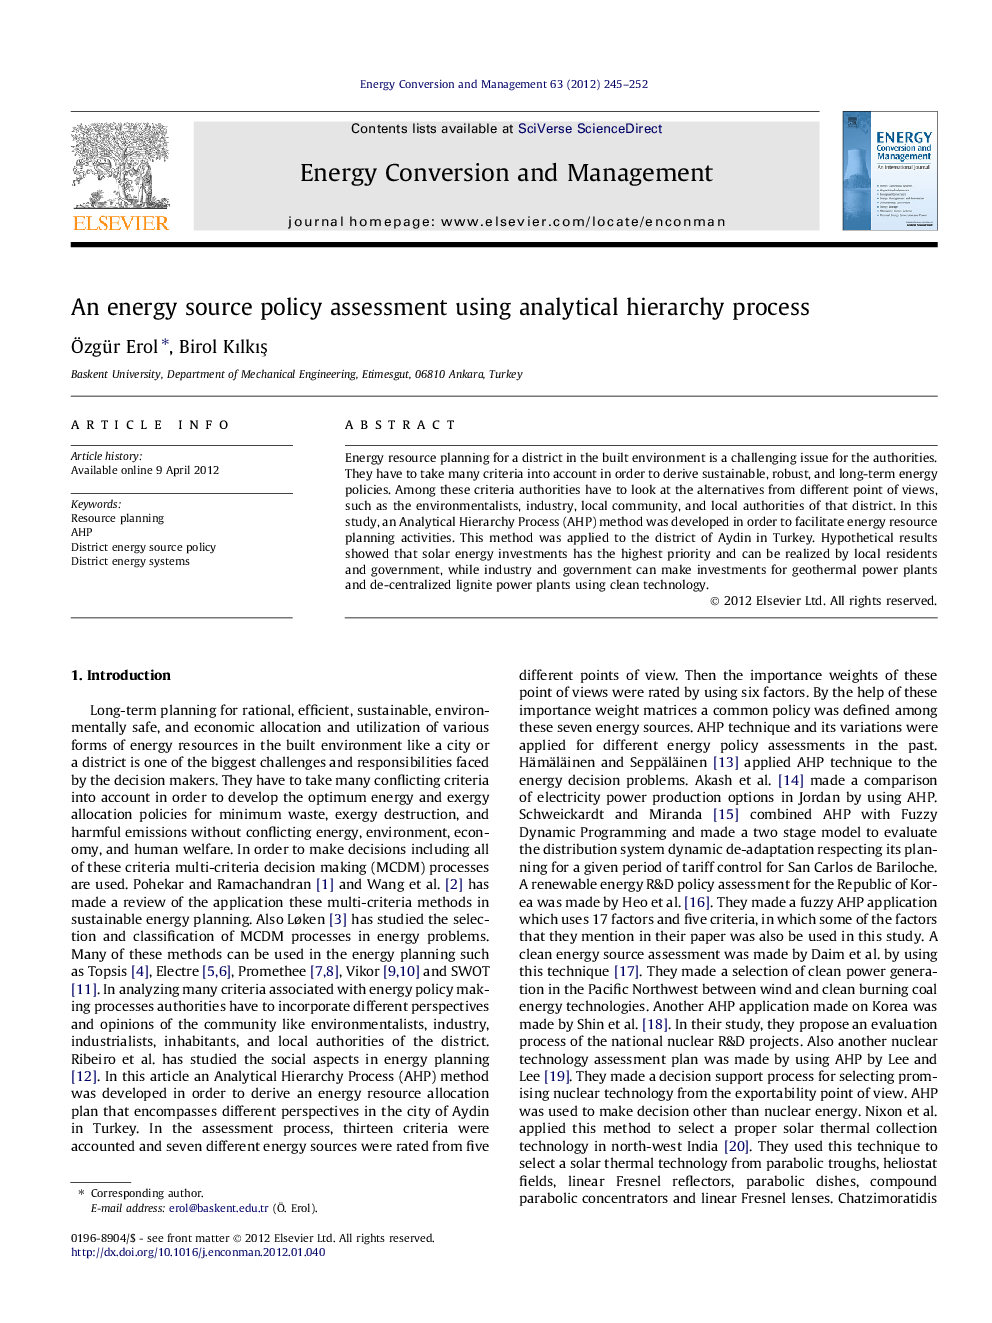 An energy source policy assessment using analytical hierarchy process